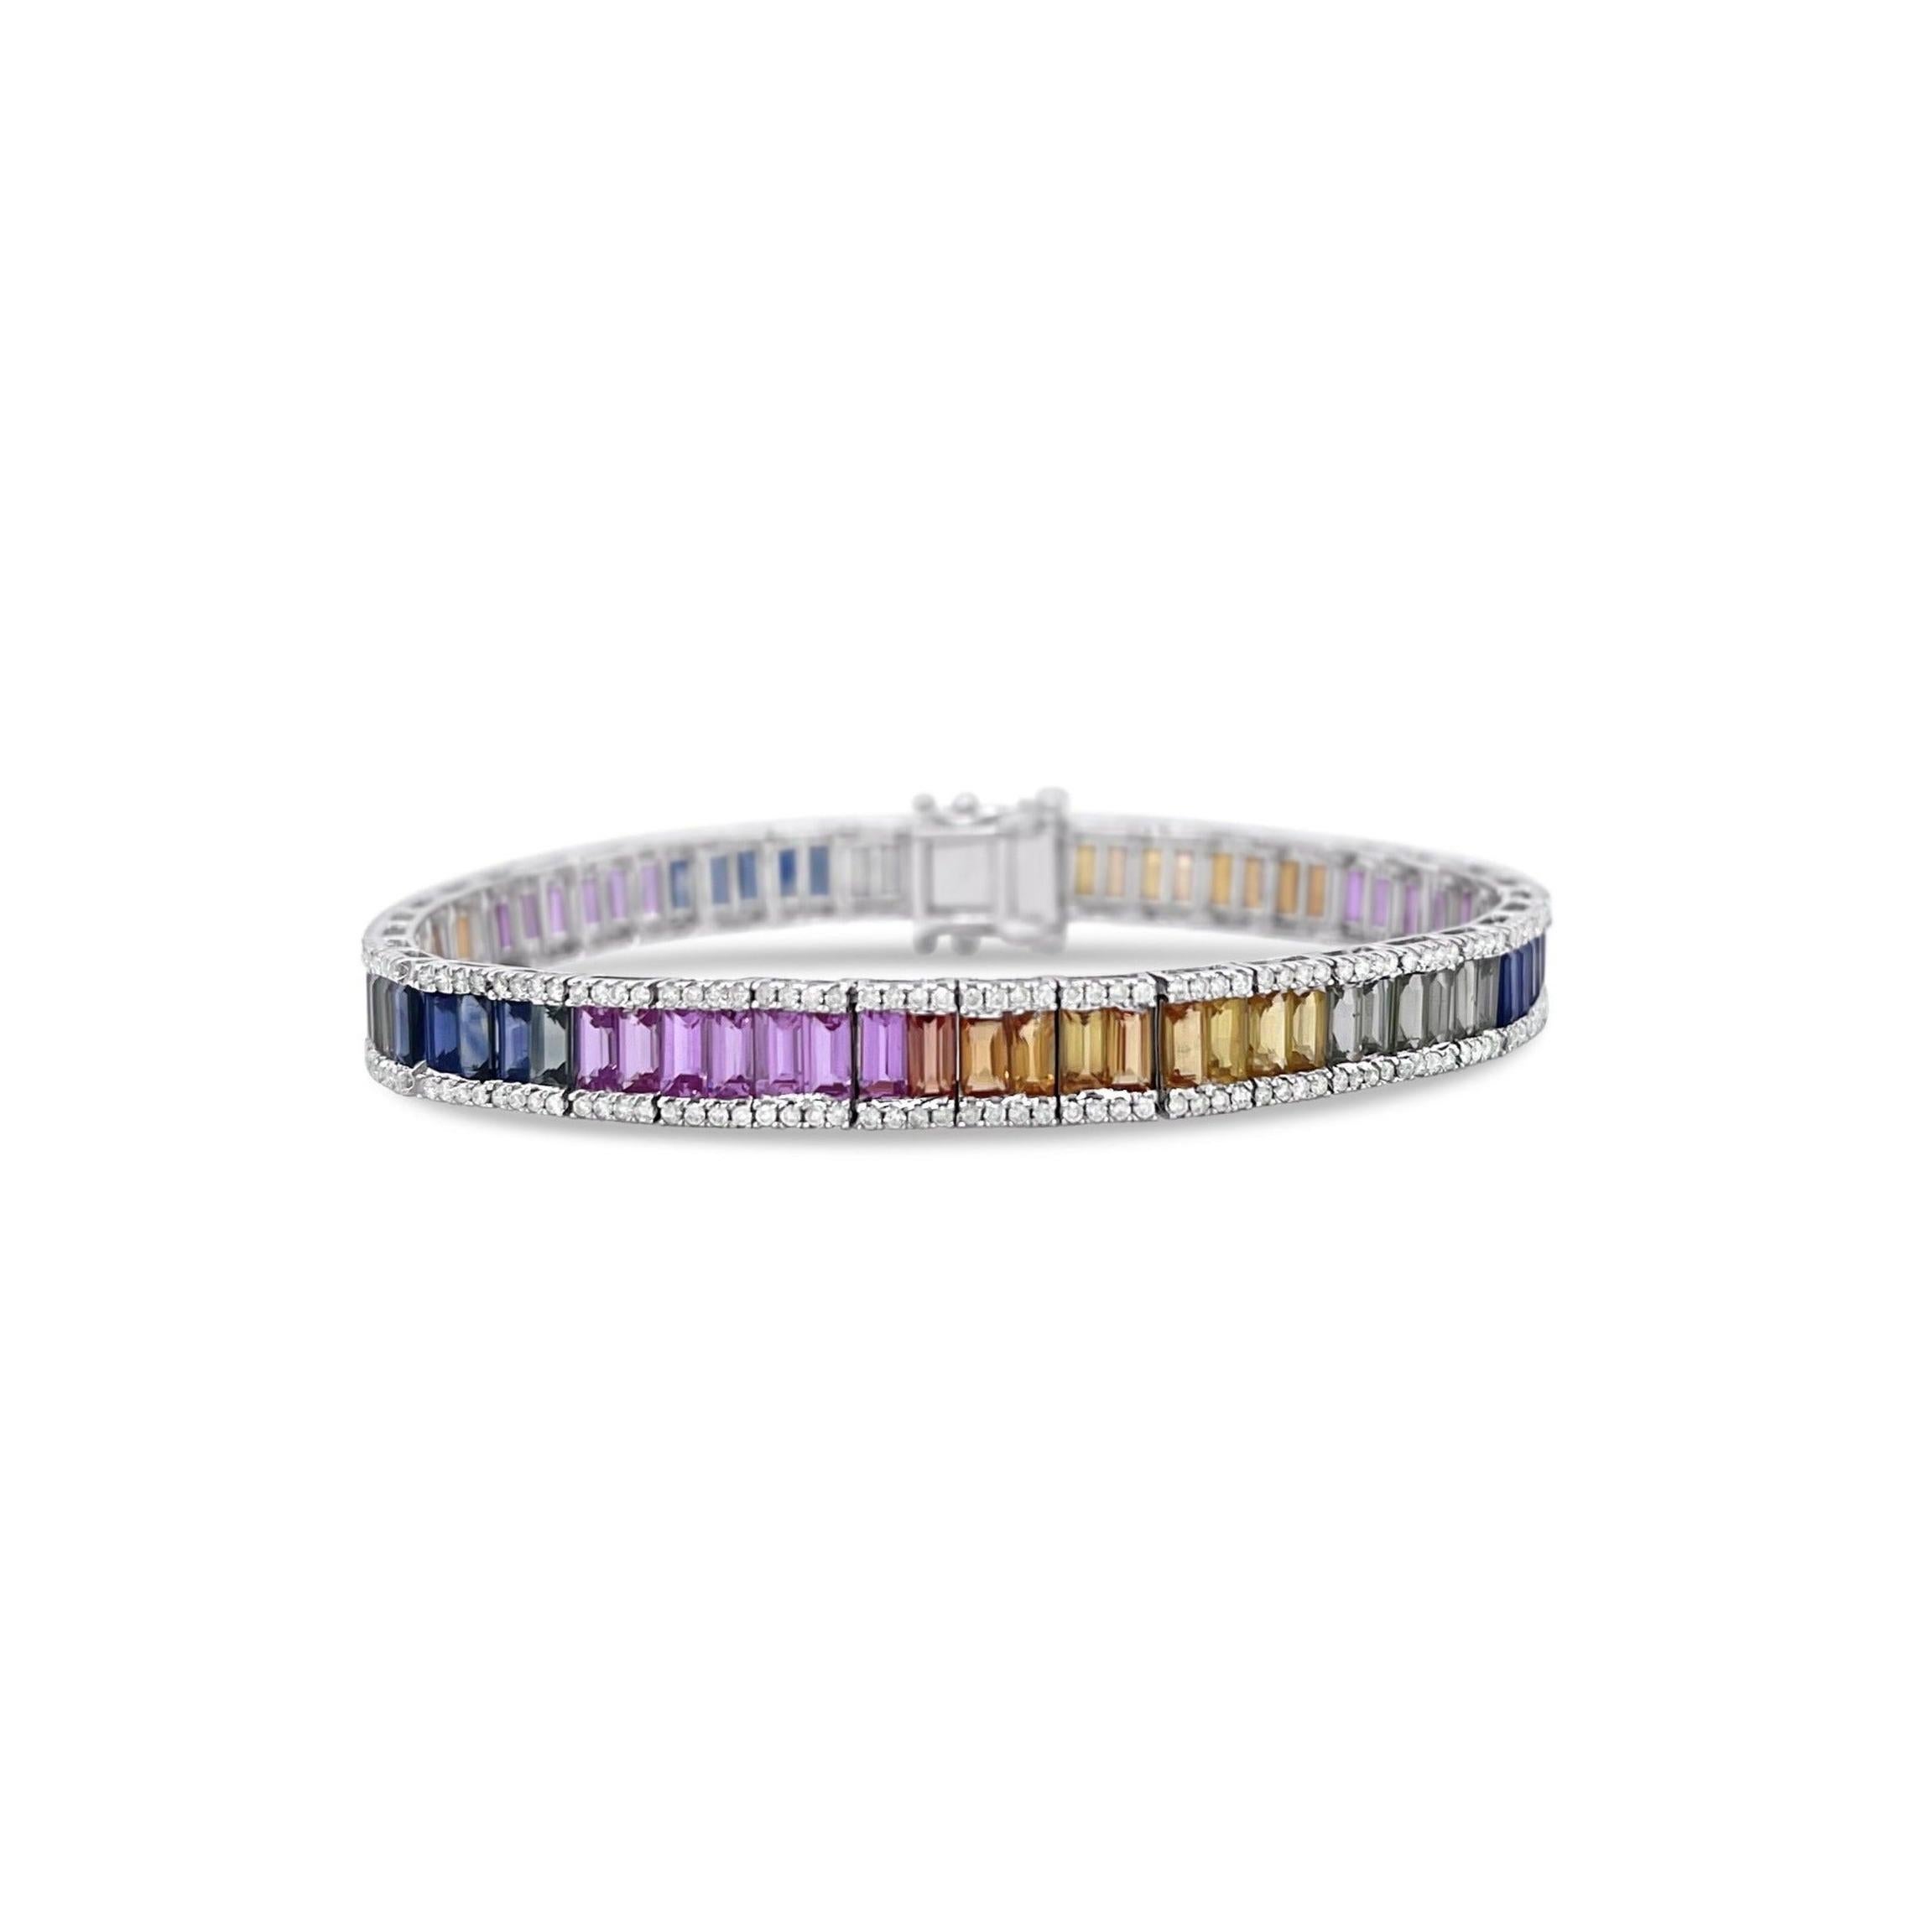 ﻿Fancy Sapphires, crafted with eighteen karat white gold, featuring a stunning set of round brilliant cut diamonds and channel set, multi coloured, fancy sapphires, complemented by a beautiful polished finish design.

 Sapphire Weight: